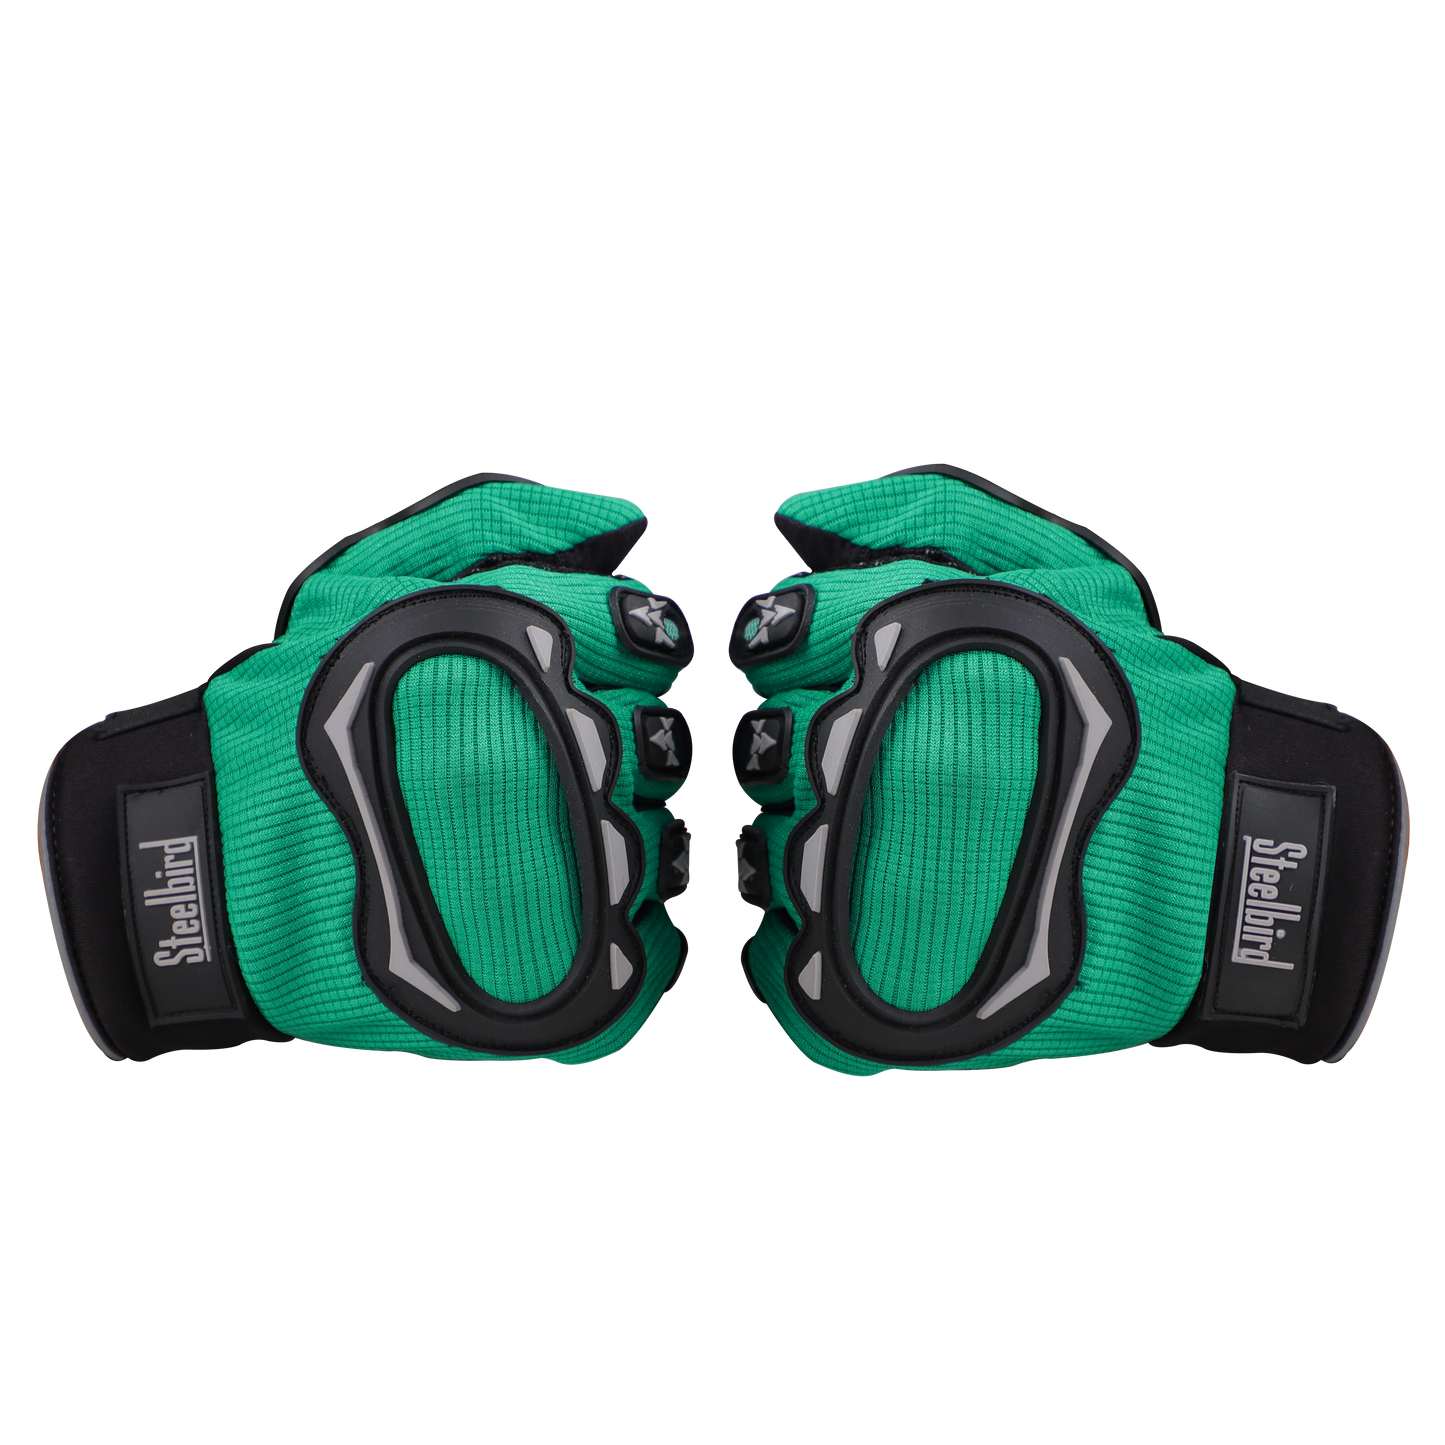 Steelbird Full Finger Bike Riding Gloves with Touch Screen Sensitivity at Thumb and Index Finger, Protective Off-Road Motorbike Racing (Green Grey)